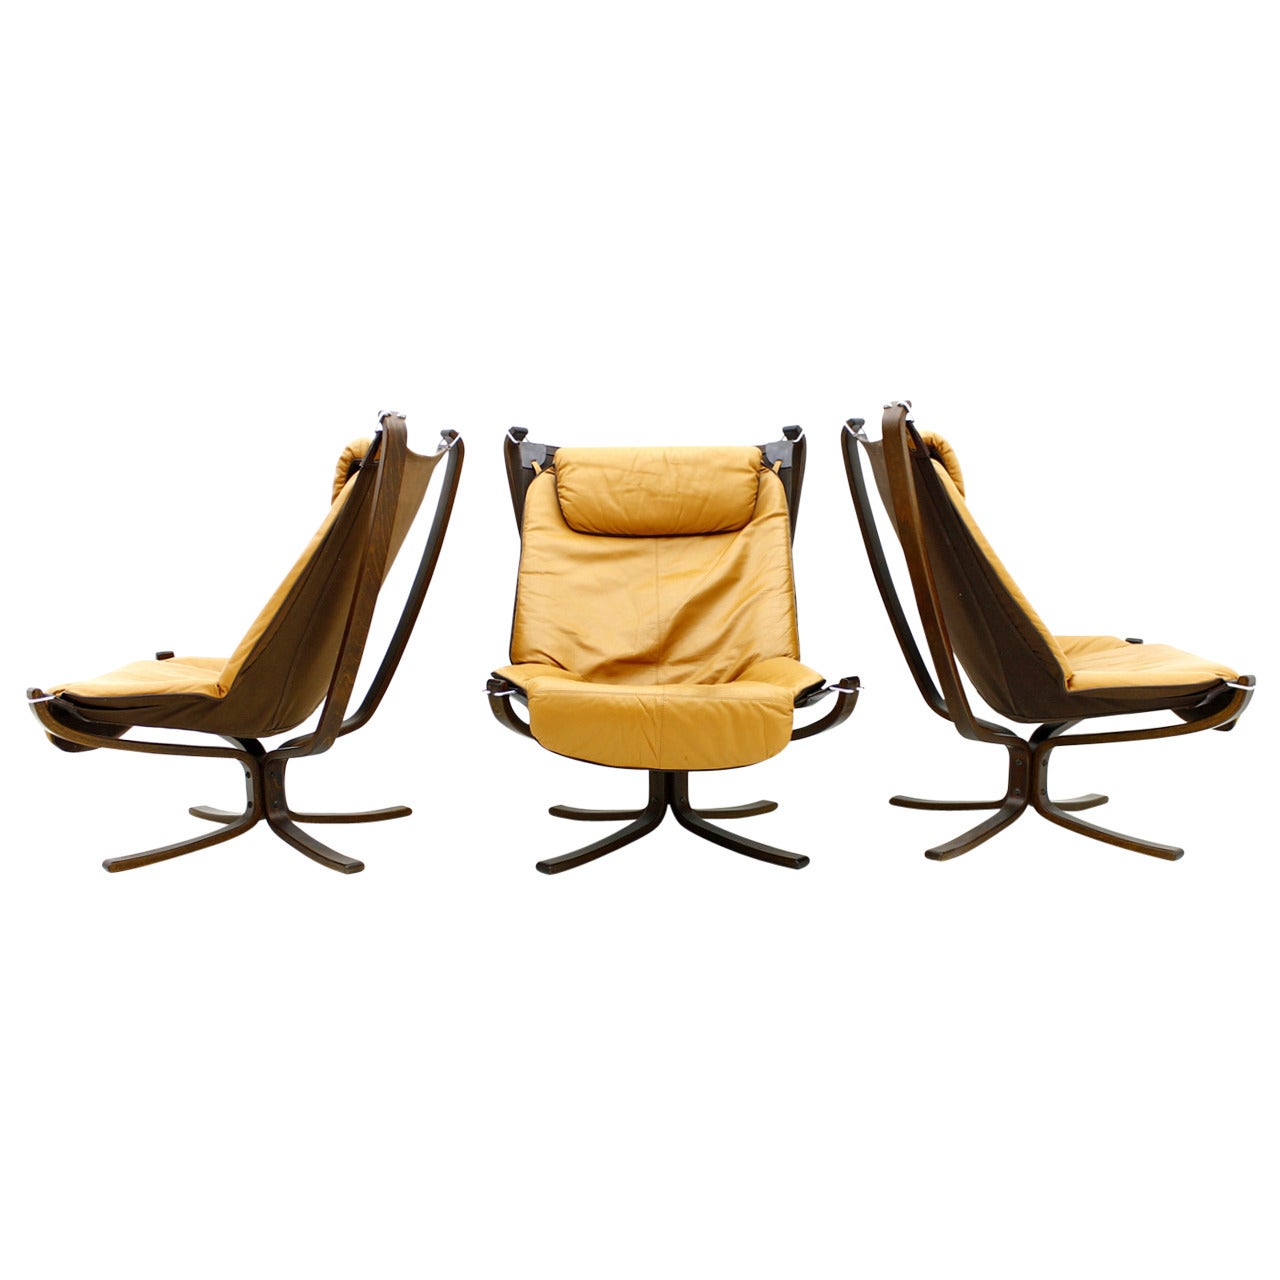 Set of Three Falcon High Back Lounge Chairs by Sigurd Resell, Norway 1971